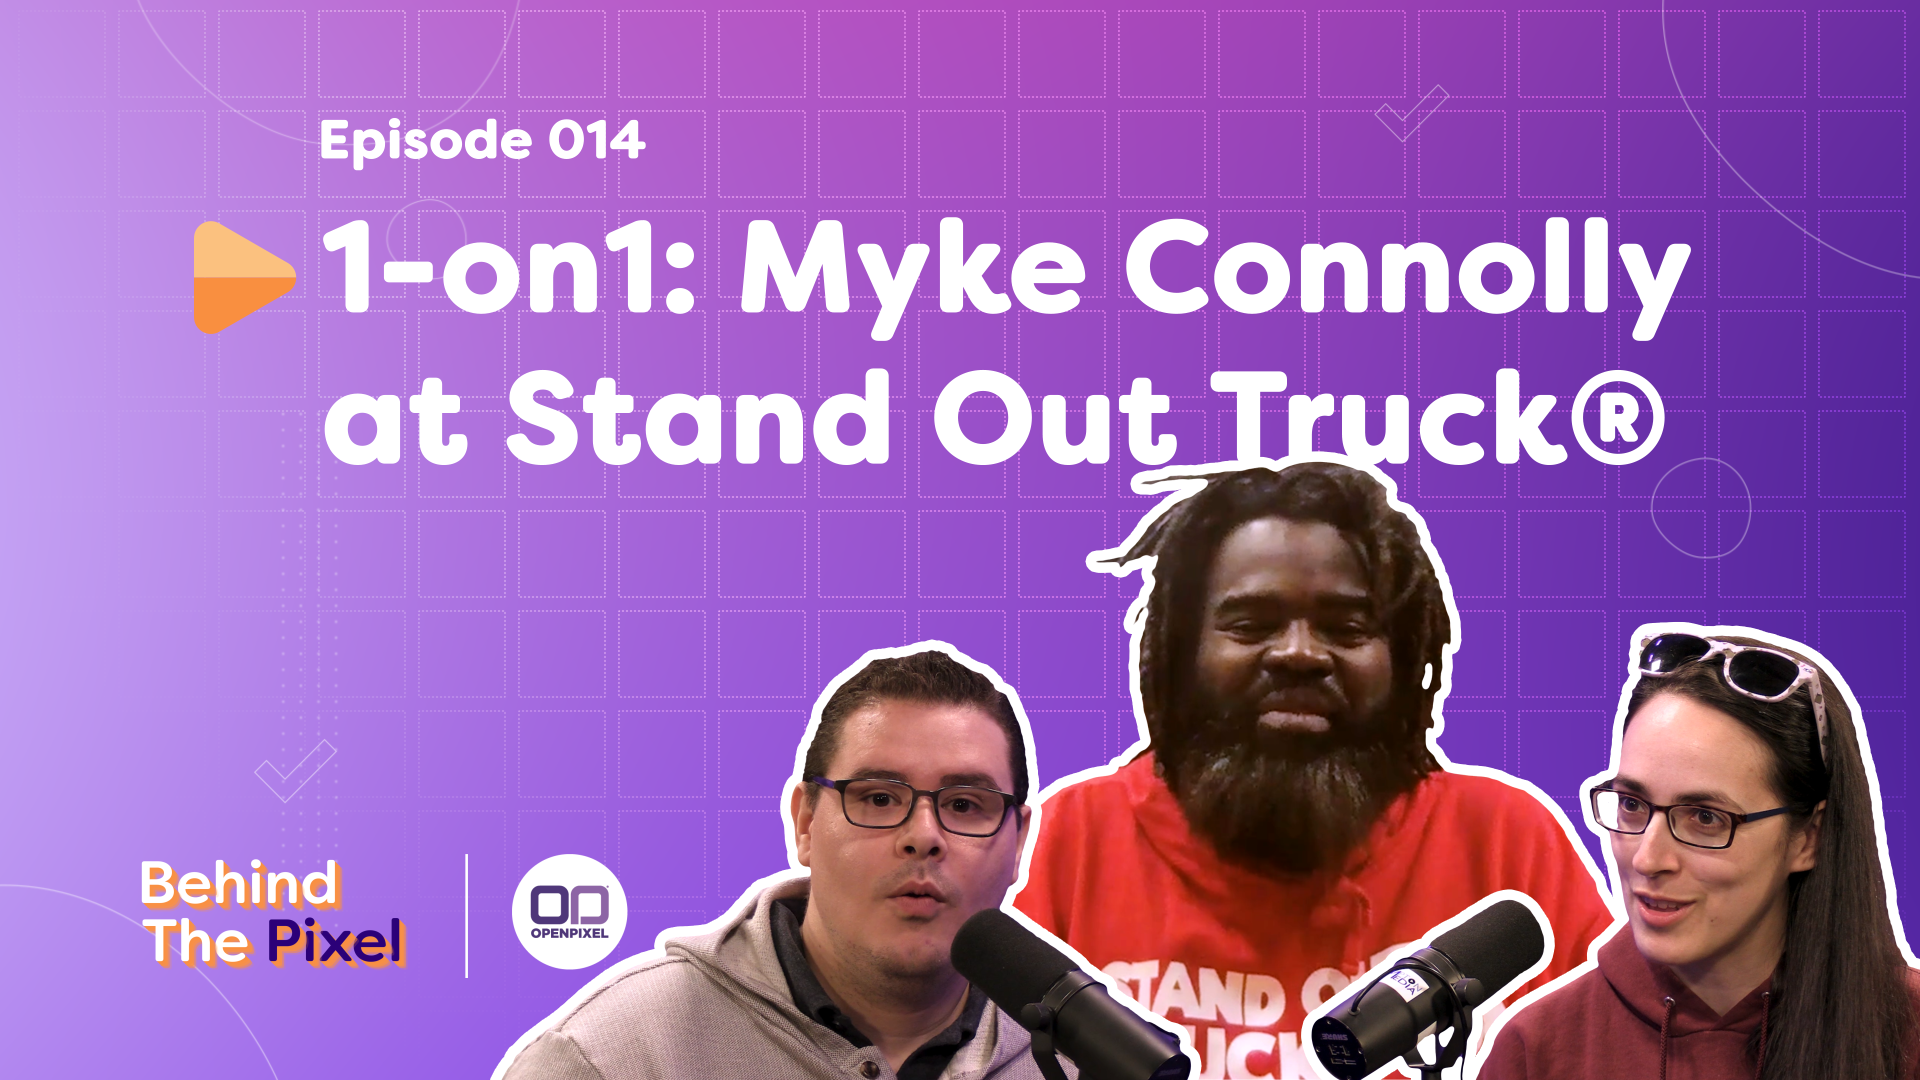  Will, Kathryn, and Myke are each cut out like a sticker and have different expressions, from laughing to curious based on their conversation. The text reads: 1 on 1: Myke Connolly at Stand Out Truck 